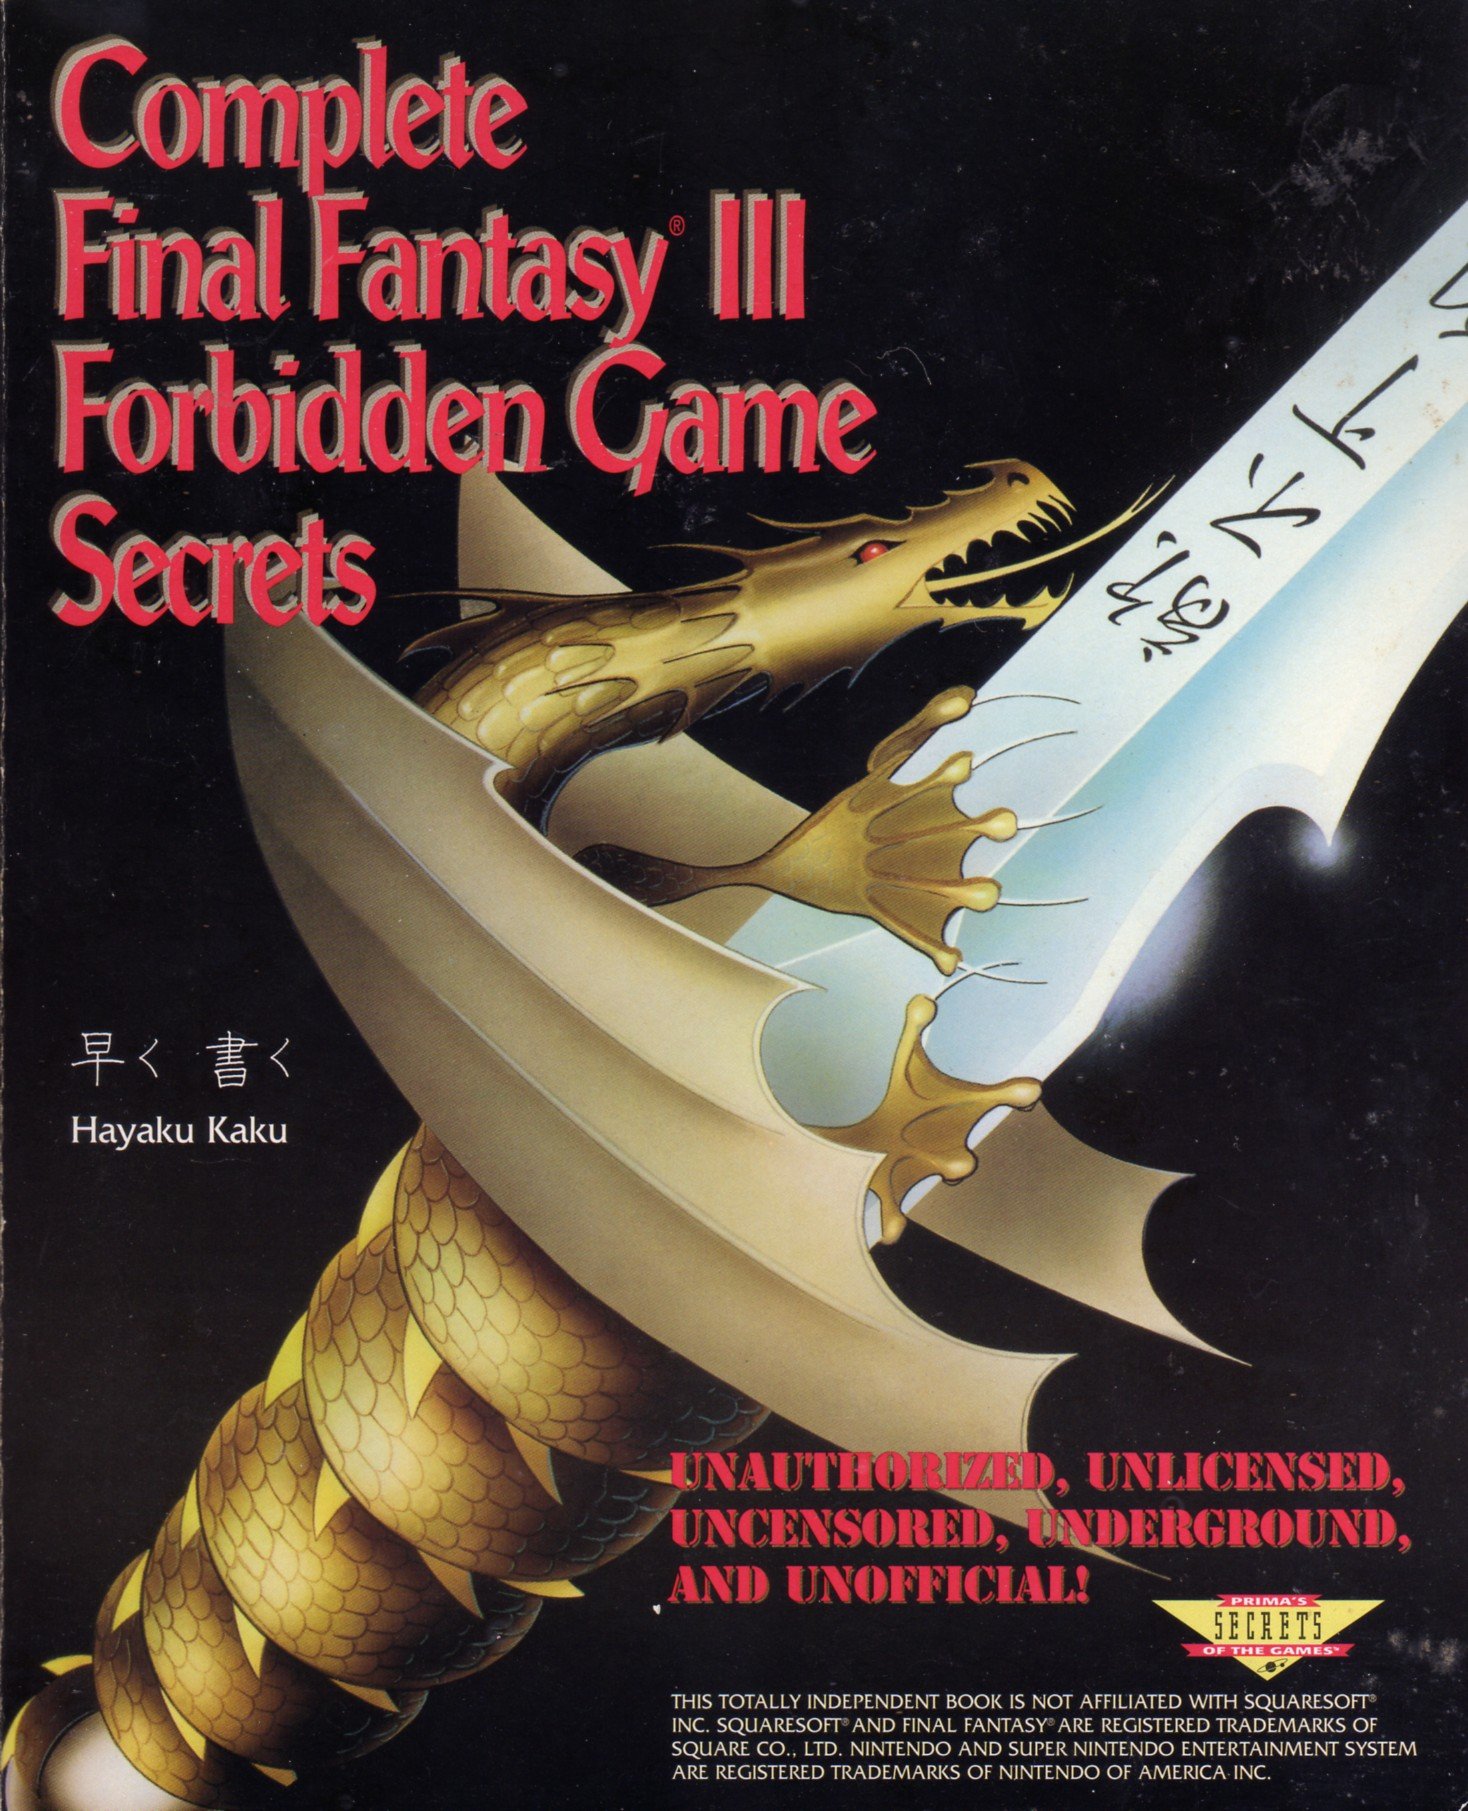 More information about "Complete Final Fantasy III Forbidden Game Secrets"